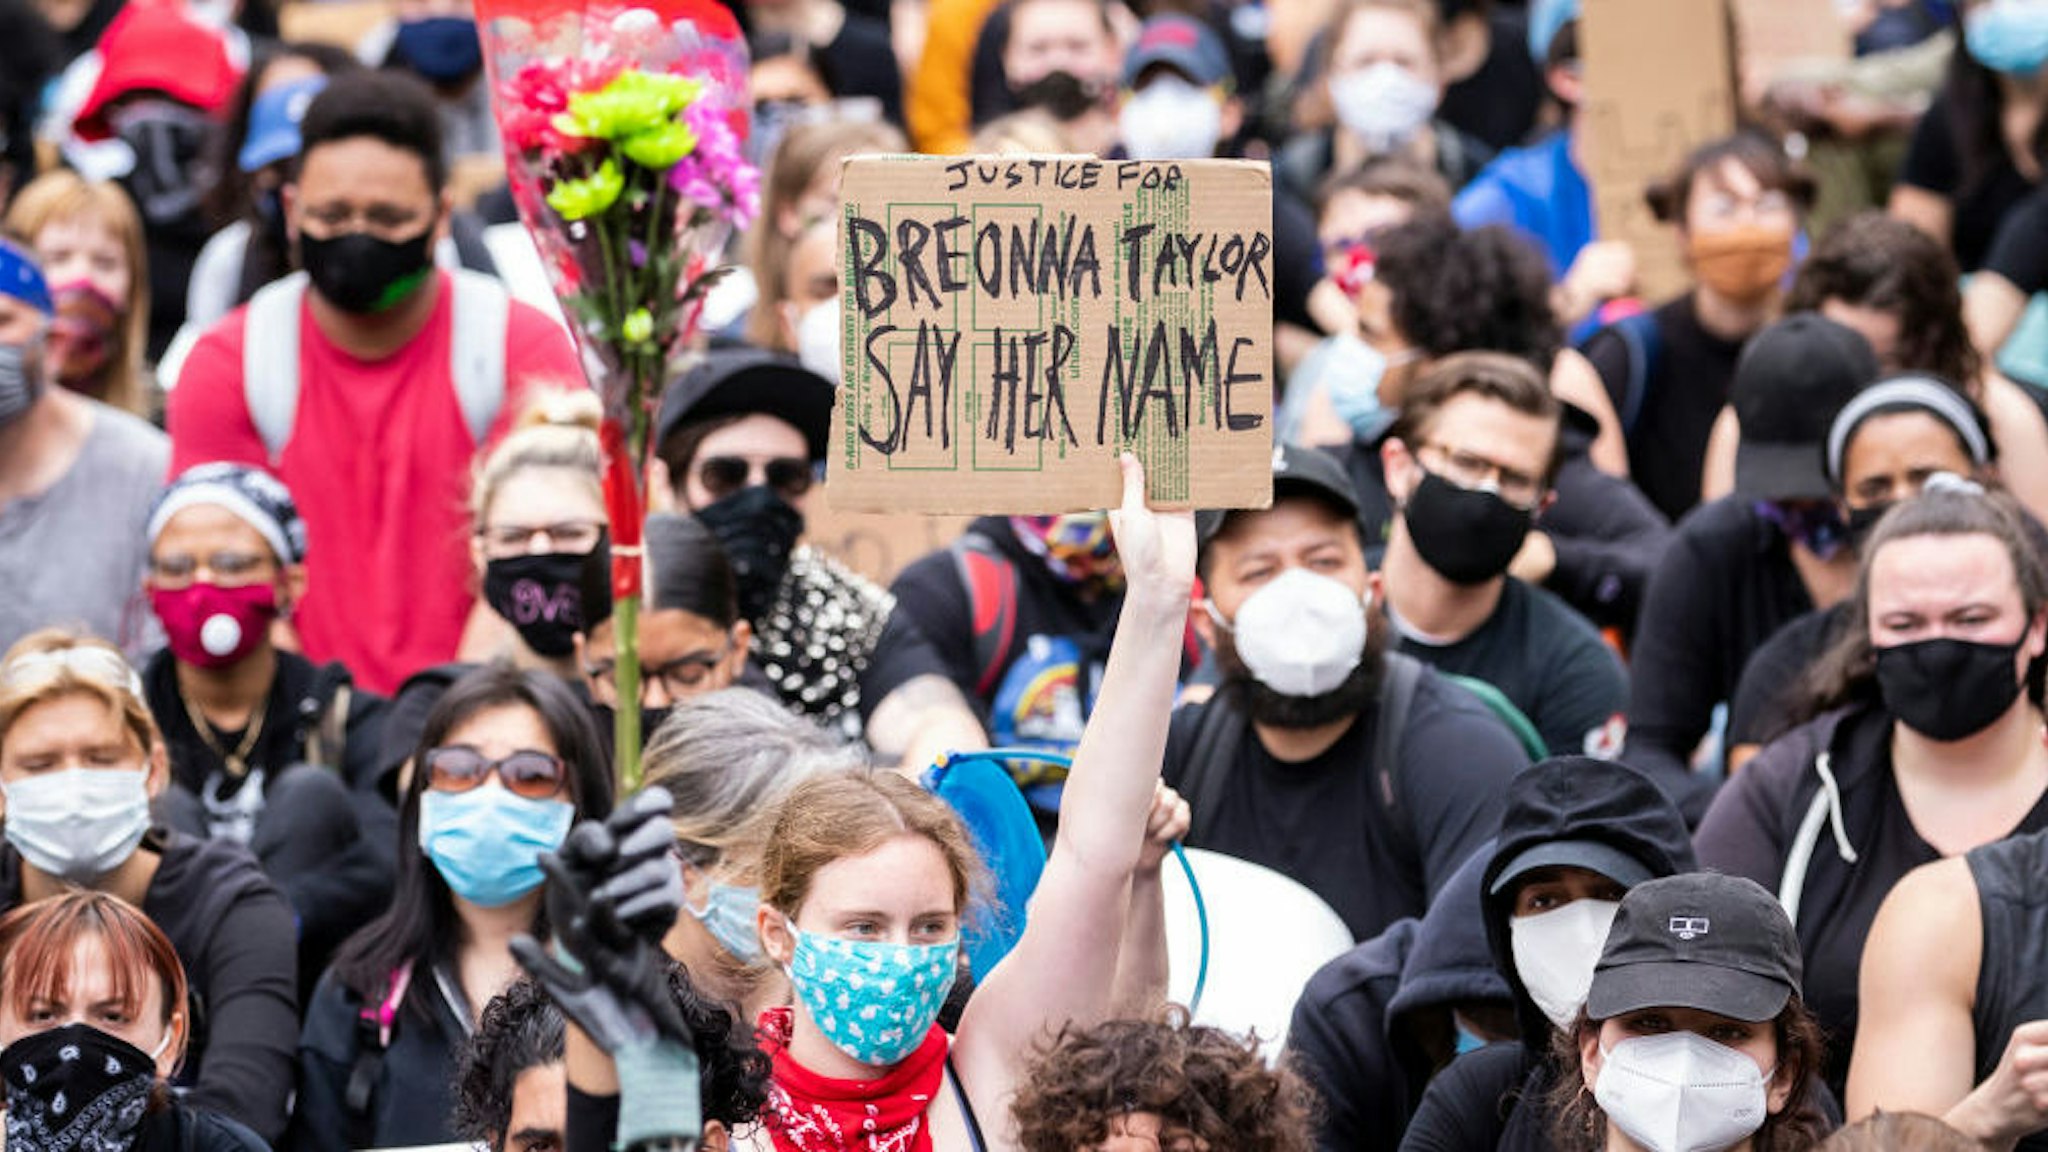 A white protester wearing a mask holds a sign that says, "Justice for Breonna Taylor Say Her Name" while another protester holds a bouquet of flowers next to them among the large crowd in Foley Square. On July 30, 2020, Oprah Magazine announced that they were going to feature Breonna Taylor on the cover. This is the first time someone other than Oprah has been on the cover of Oprah Magazine in its 20 year history. On July 28, 2020 Nikki Stone a homeless transgender woman was abducted off the streets and taken onto an unmarked van and arrested. Protesters took to the streets across America after the killing of George Floyd at the hands of a white police officer Derek Chauvin that was kneeling on his neck during his arrest as he pleaded that he couldn't breathe. The protest are attempting to give a voice to the need for human rights for African American's and to stop police brutality against people of color. Many people were wearing masks and observing social distancing due to the coronavirus pandemic. Leaders of the protest were clear that they wanted it to be a peaceful protest in light of nights of unrest looting and destruction. Photographed in the Manhattan Borough of New York on June 02, 2020, USA. (Photo by Ira L. Black/Corbis via Getty Images)